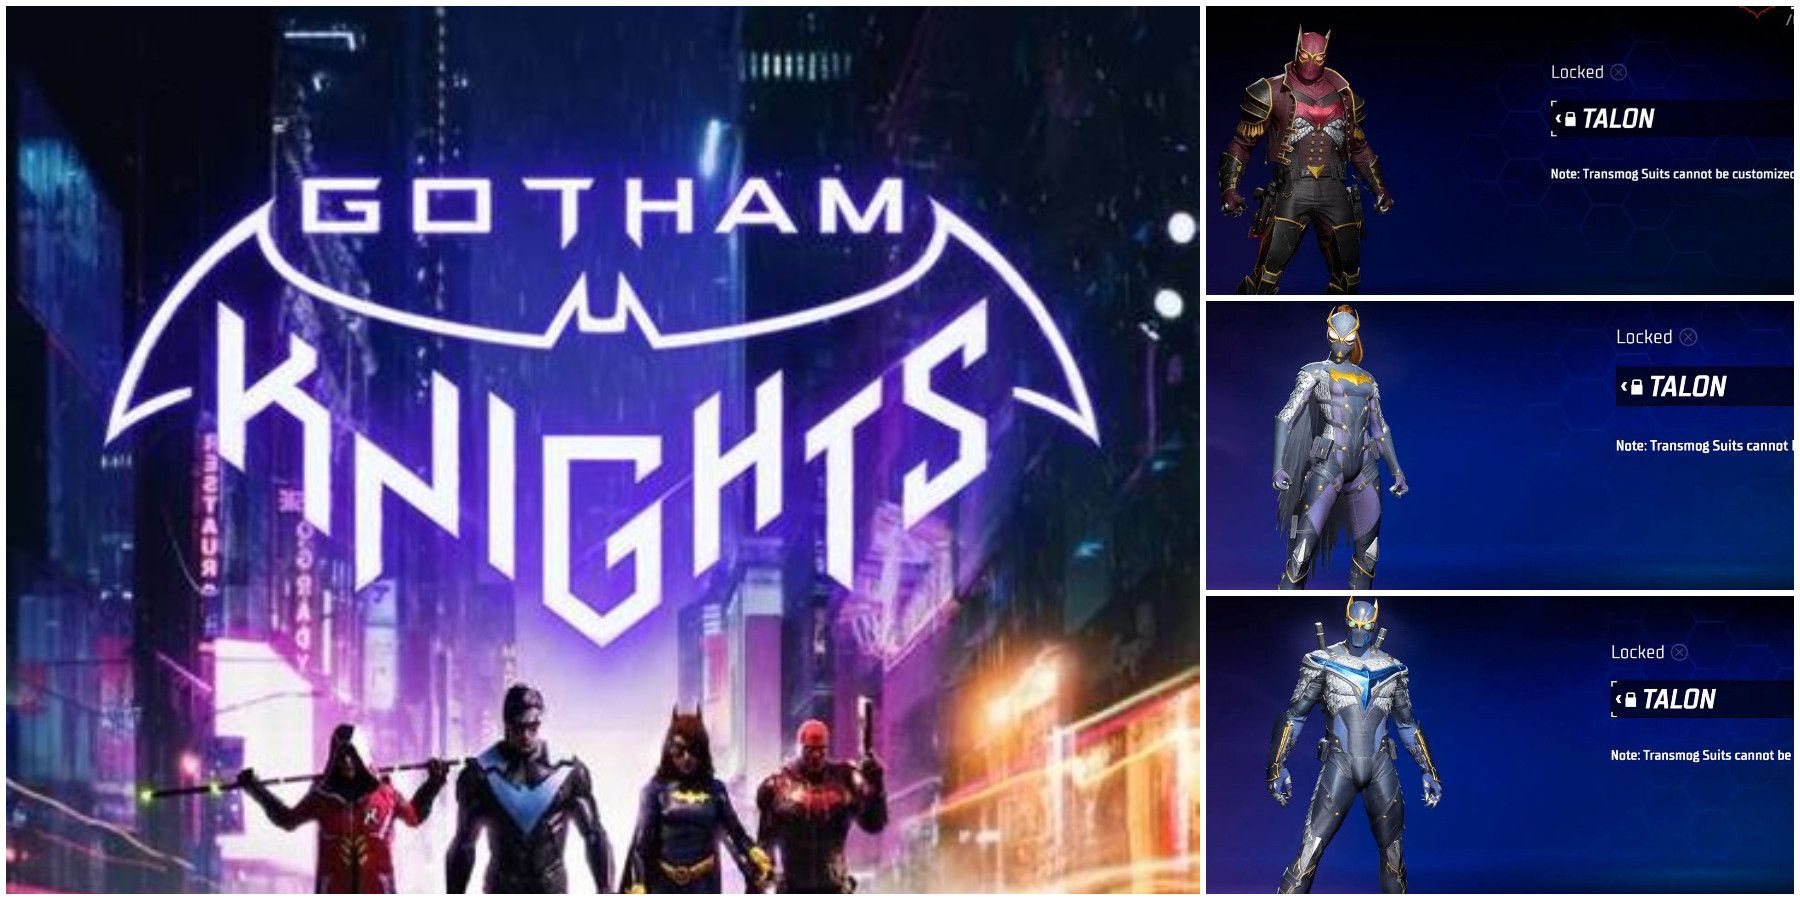 Gotham Knights Guide - Tips, Tricks, Bosses, Puzzles, & Abilities